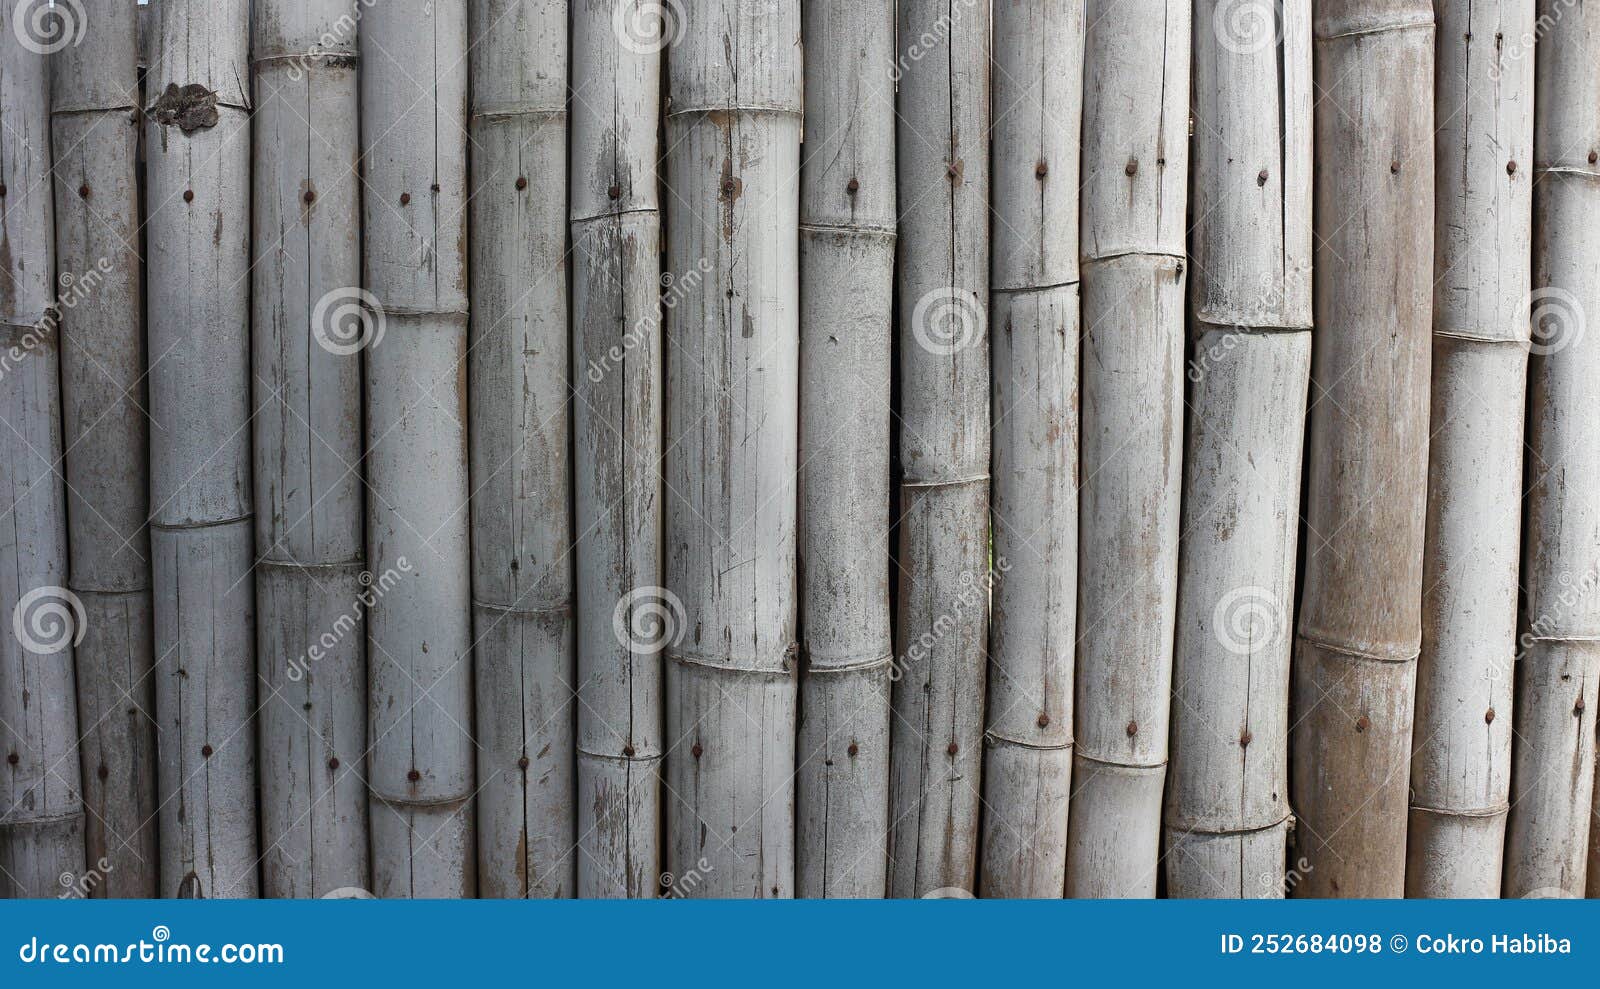 a bamboo fence background that looks aesthetic and neat